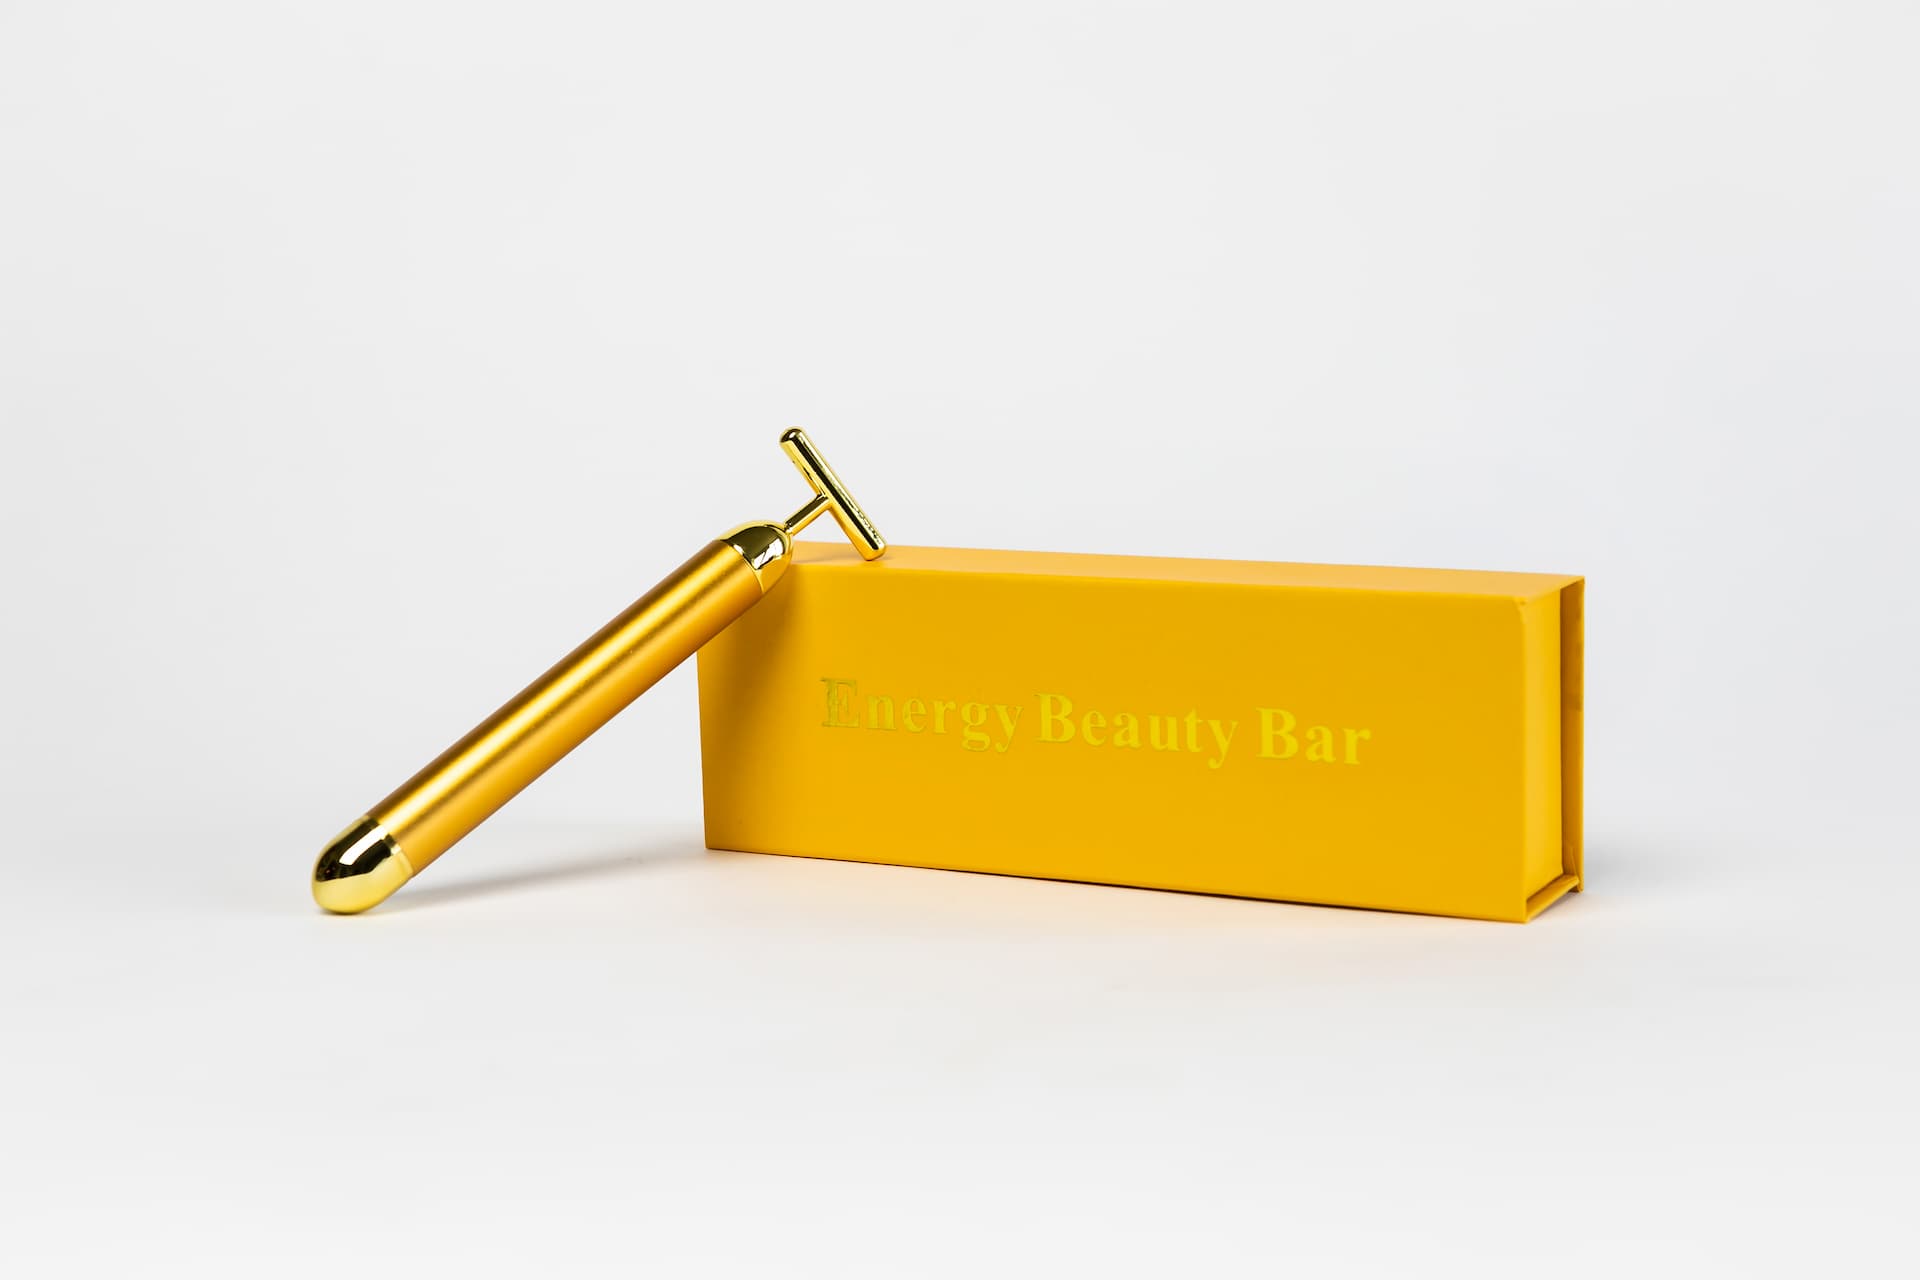 Gold Facial Vibrating tool for Injectables